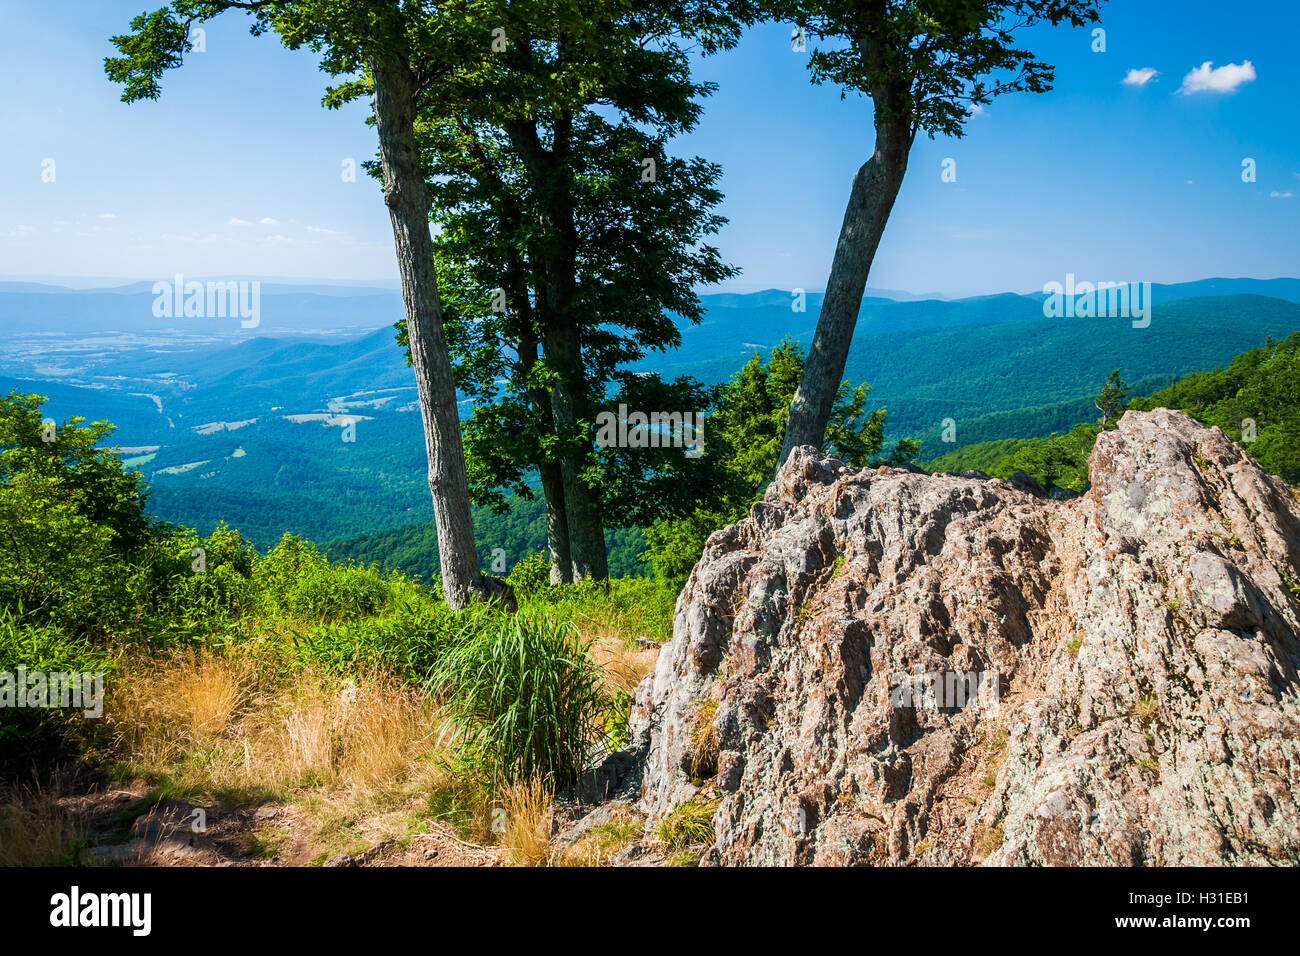 View of the Blue Ridge Mountains and Shenandoah Valley from Jewell Hollow Overlook, in Shenandoah National Park, Virginia. Stock Photo